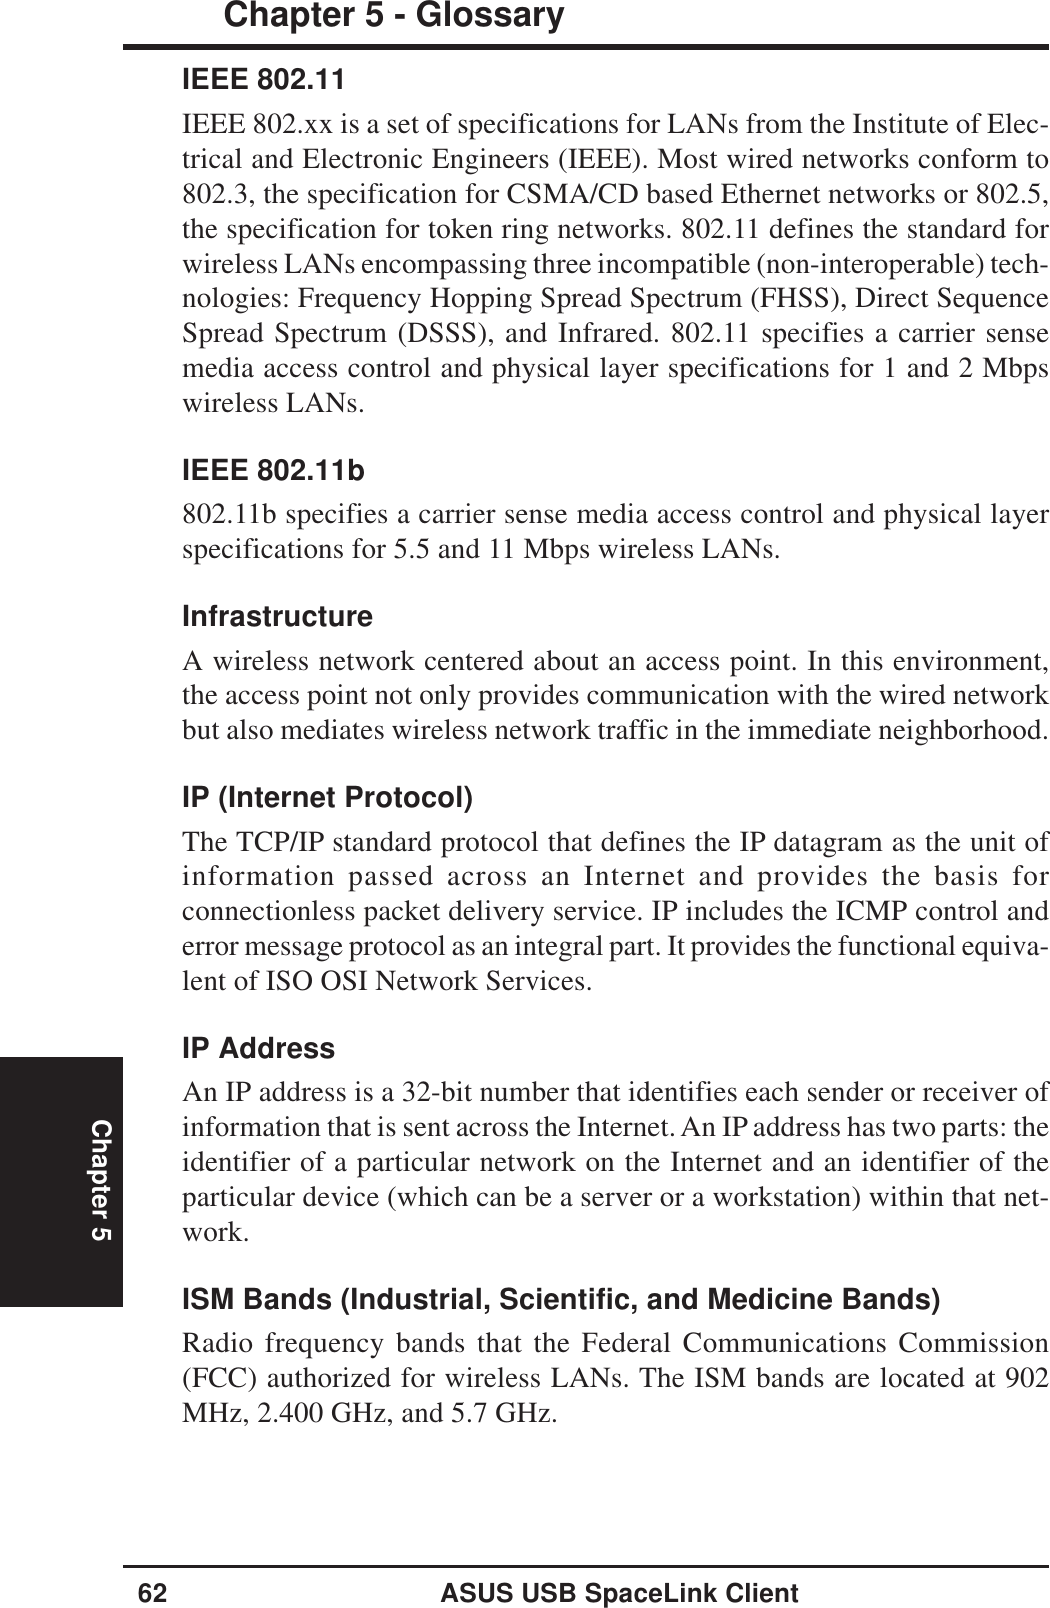 62 ASUS USB SpaceLink ClientChapter 5 - GlossaryChapter 5IEEE 802.11IEEE 802.xx is a set of specifications for LANs from the Institute of Elec-trical and Electronic Engineers (IEEE). Most wired networks conform to802.3, the specification for CSMA/CD based Ethernet networks or 802.5,the specification for token ring networks. 802.11 defines the standard forwireless LANs encompassing three incompatible (non-interoperable) tech-nologies: Frequency Hopping Spread Spectrum (FHSS), Direct SequenceSpread Spectrum (DSSS), and Infrared. 802.11 specifies a carrier sensemedia access control and physical layer specifications for 1 and 2 Mbpswireless LANs.IEEE 802.11b802.11b specifies a carrier sense media access control and physical layerspecifications for 5.5 and 11 Mbps wireless LANs.InfrastructureA wireless network centered about an access point. In this environment,the access point not only provides communication with the wired networkbut also mediates wireless network traffic in the immediate neighborhood.IP (Internet Protocol)The TCP/IP standard protocol that defines the IP datagram as the unit ofinformation passed across an Internet and provides the basis forconnectionless packet delivery service. IP includes the ICMP control anderror message protocol as an integral part. It provides the functional equiva-lent of ISO OSI Network Services.IP AddressAn IP address is a 32-bit number that identifies each sender or receiver ofinformation that is sent across the Internet. An IP address has two parts: theidentifier of a particular network on the Internet and an identifier of theparticular device (which can be a server or a workstation) within that net-work.ISM Bands (Industrial, Scientific, and Medicine Bands)Radio frequency bands that the Federal Communications Commission(FCC) authorized for wireless LANs. The ISM bands are located at 902MHz, 2.400 GHz, and 5.7 GHz.